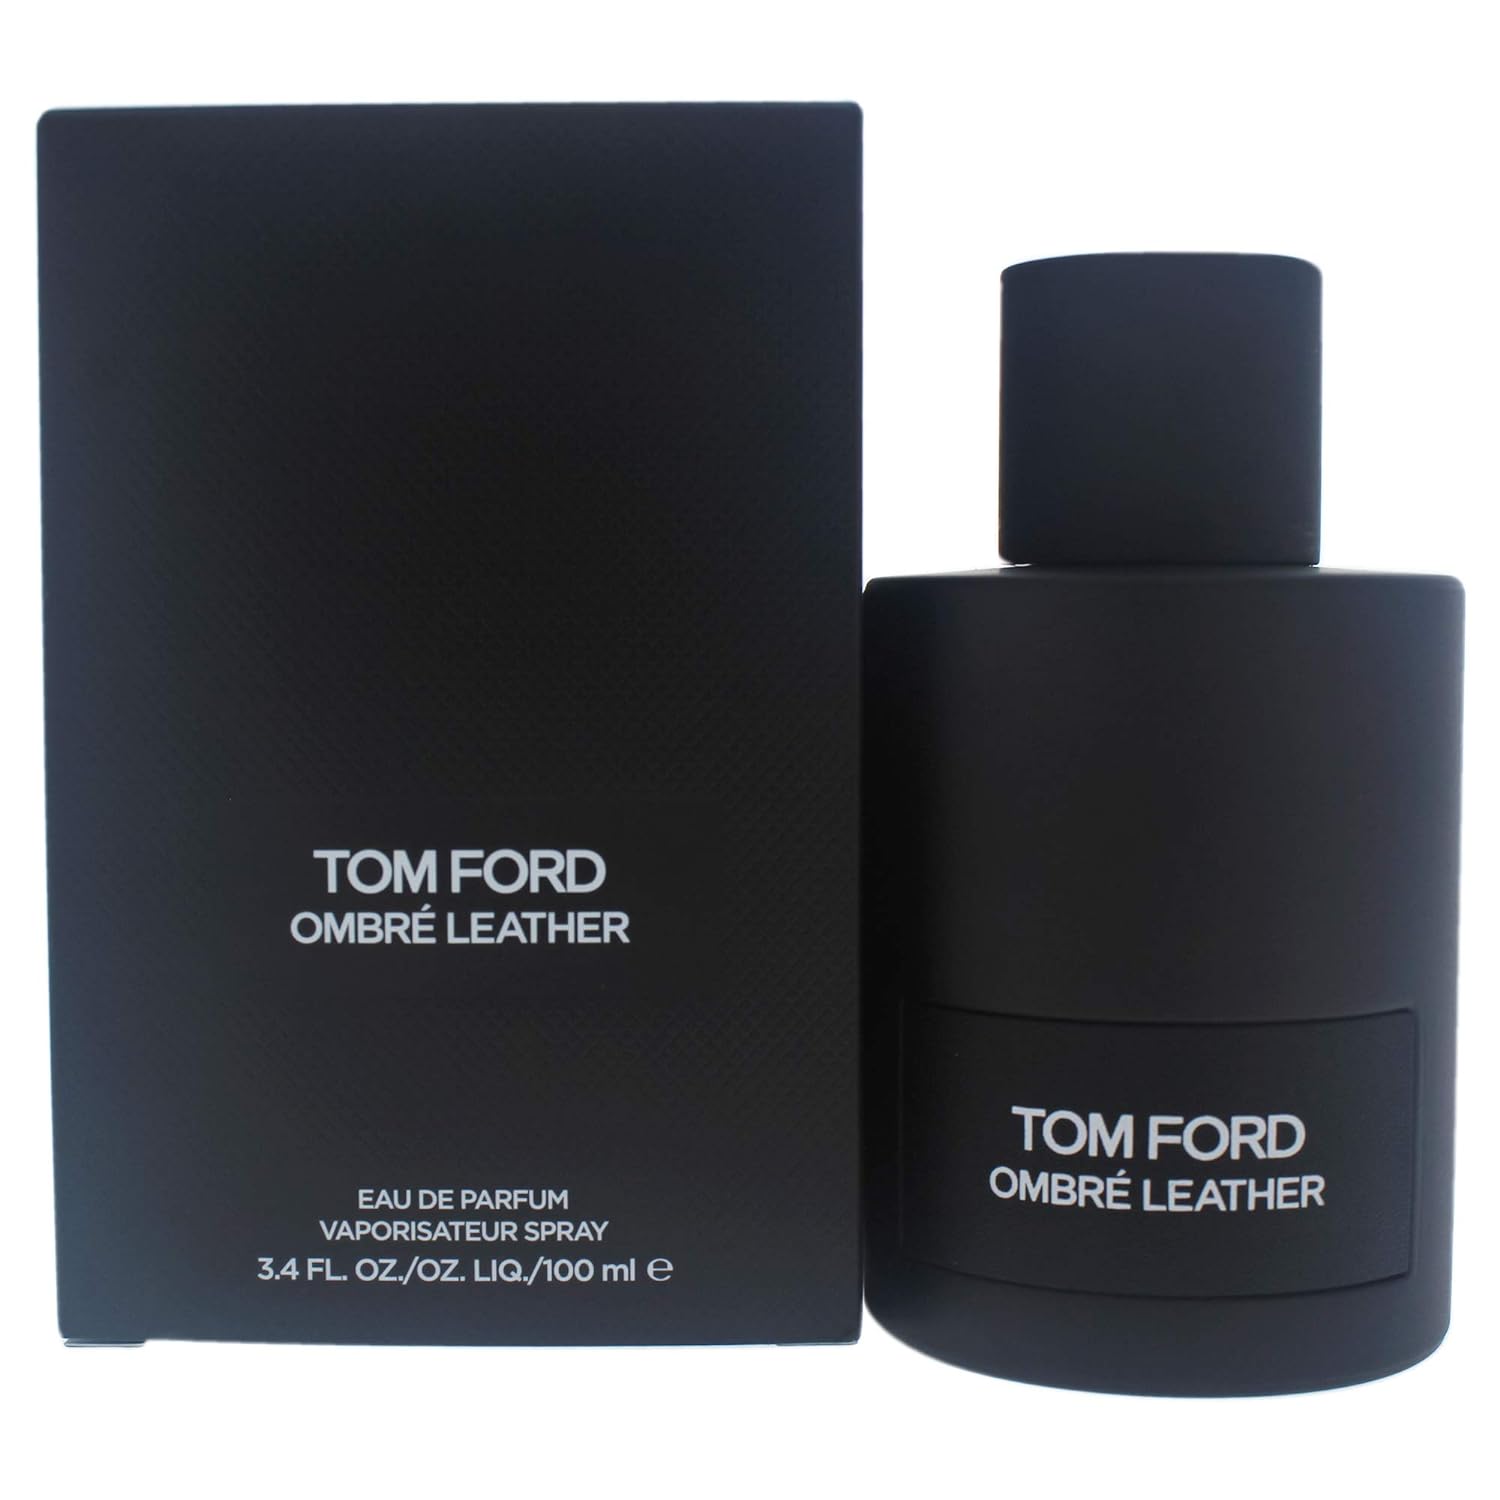 Tom Ford Ombre Leather Review: Masculine and Sexy Fragrance ...